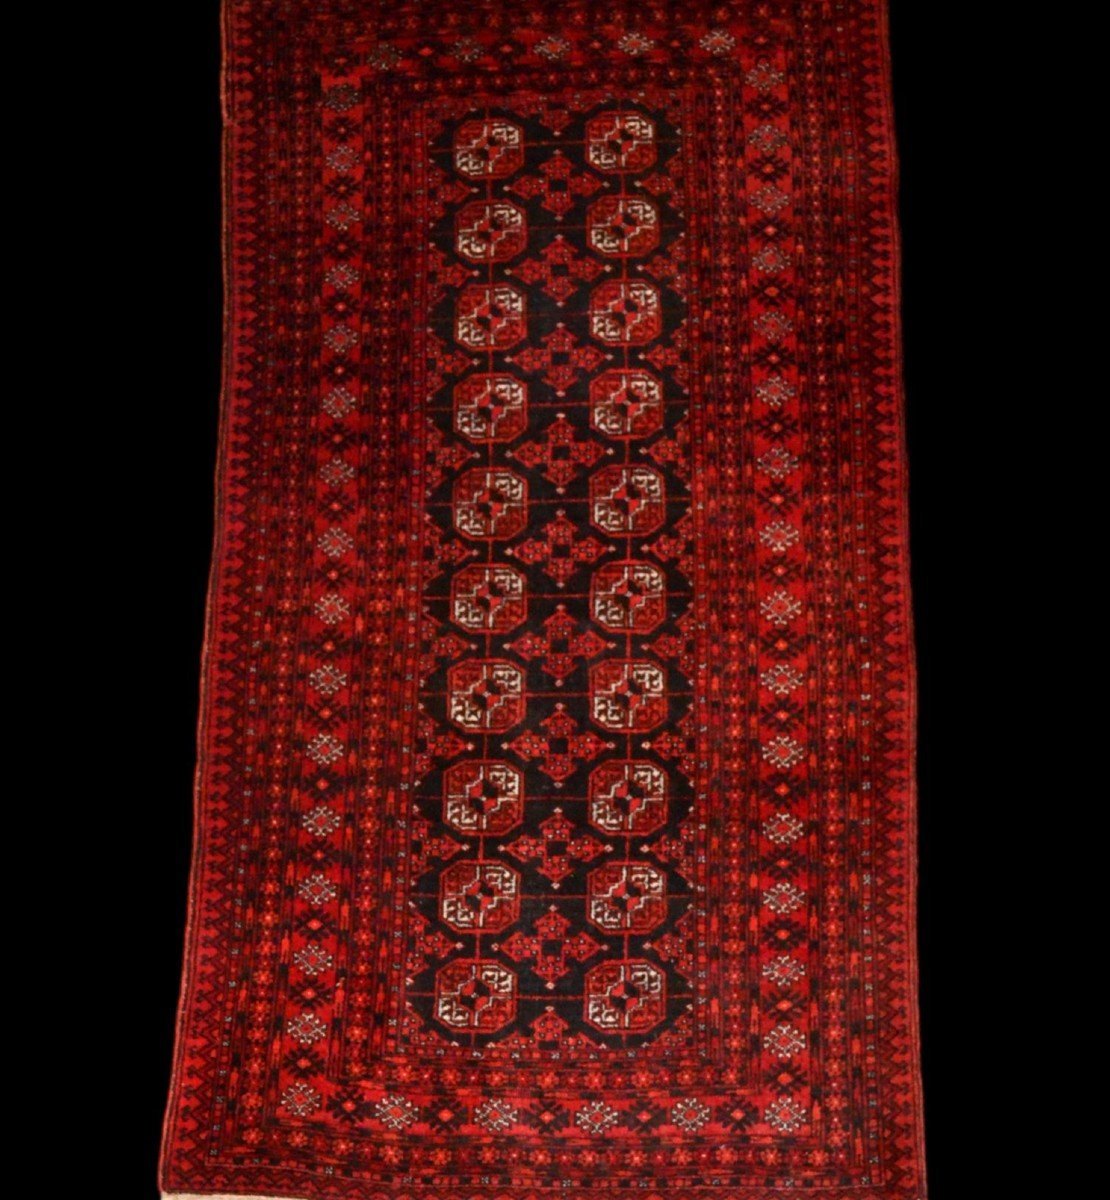 Afghan Rug, 100 Cm X 192 Cm, Hand-knotted Wool In Afghanistan Around 1970, Perfect Condition